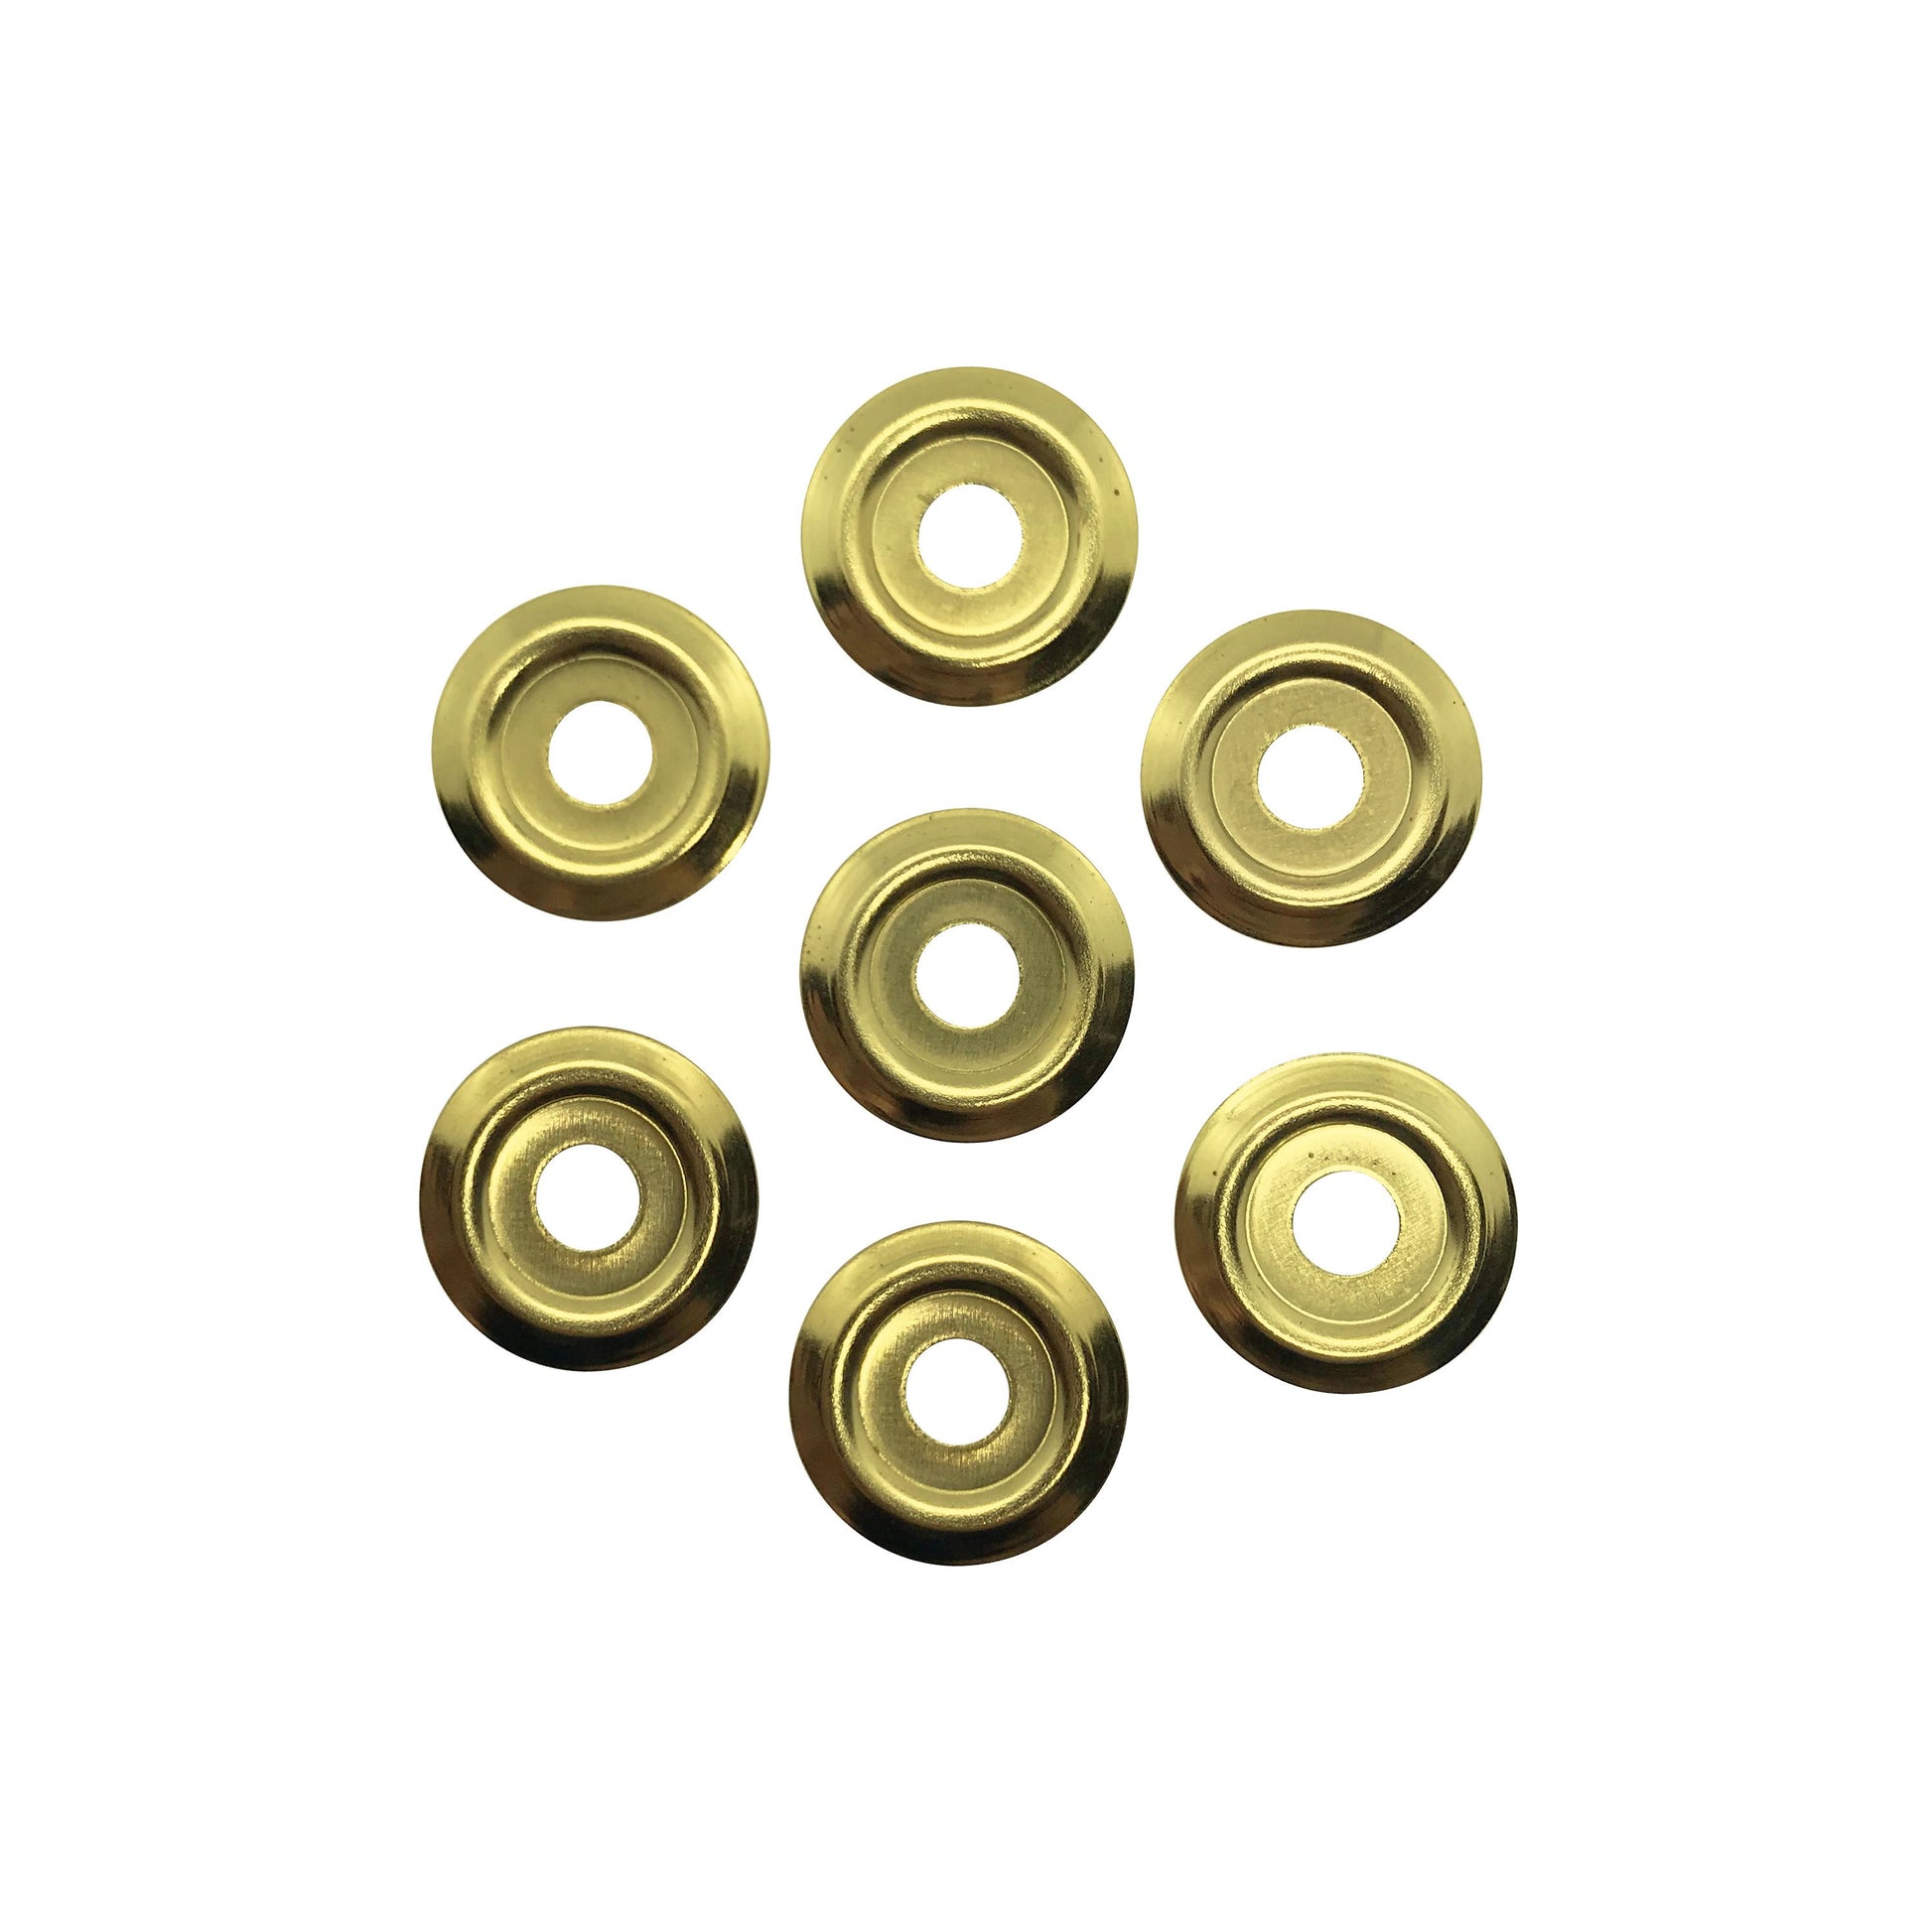 A collection of Binding Screw Washers - Brass / Gold-coloured by Gobrecht & Ulrich